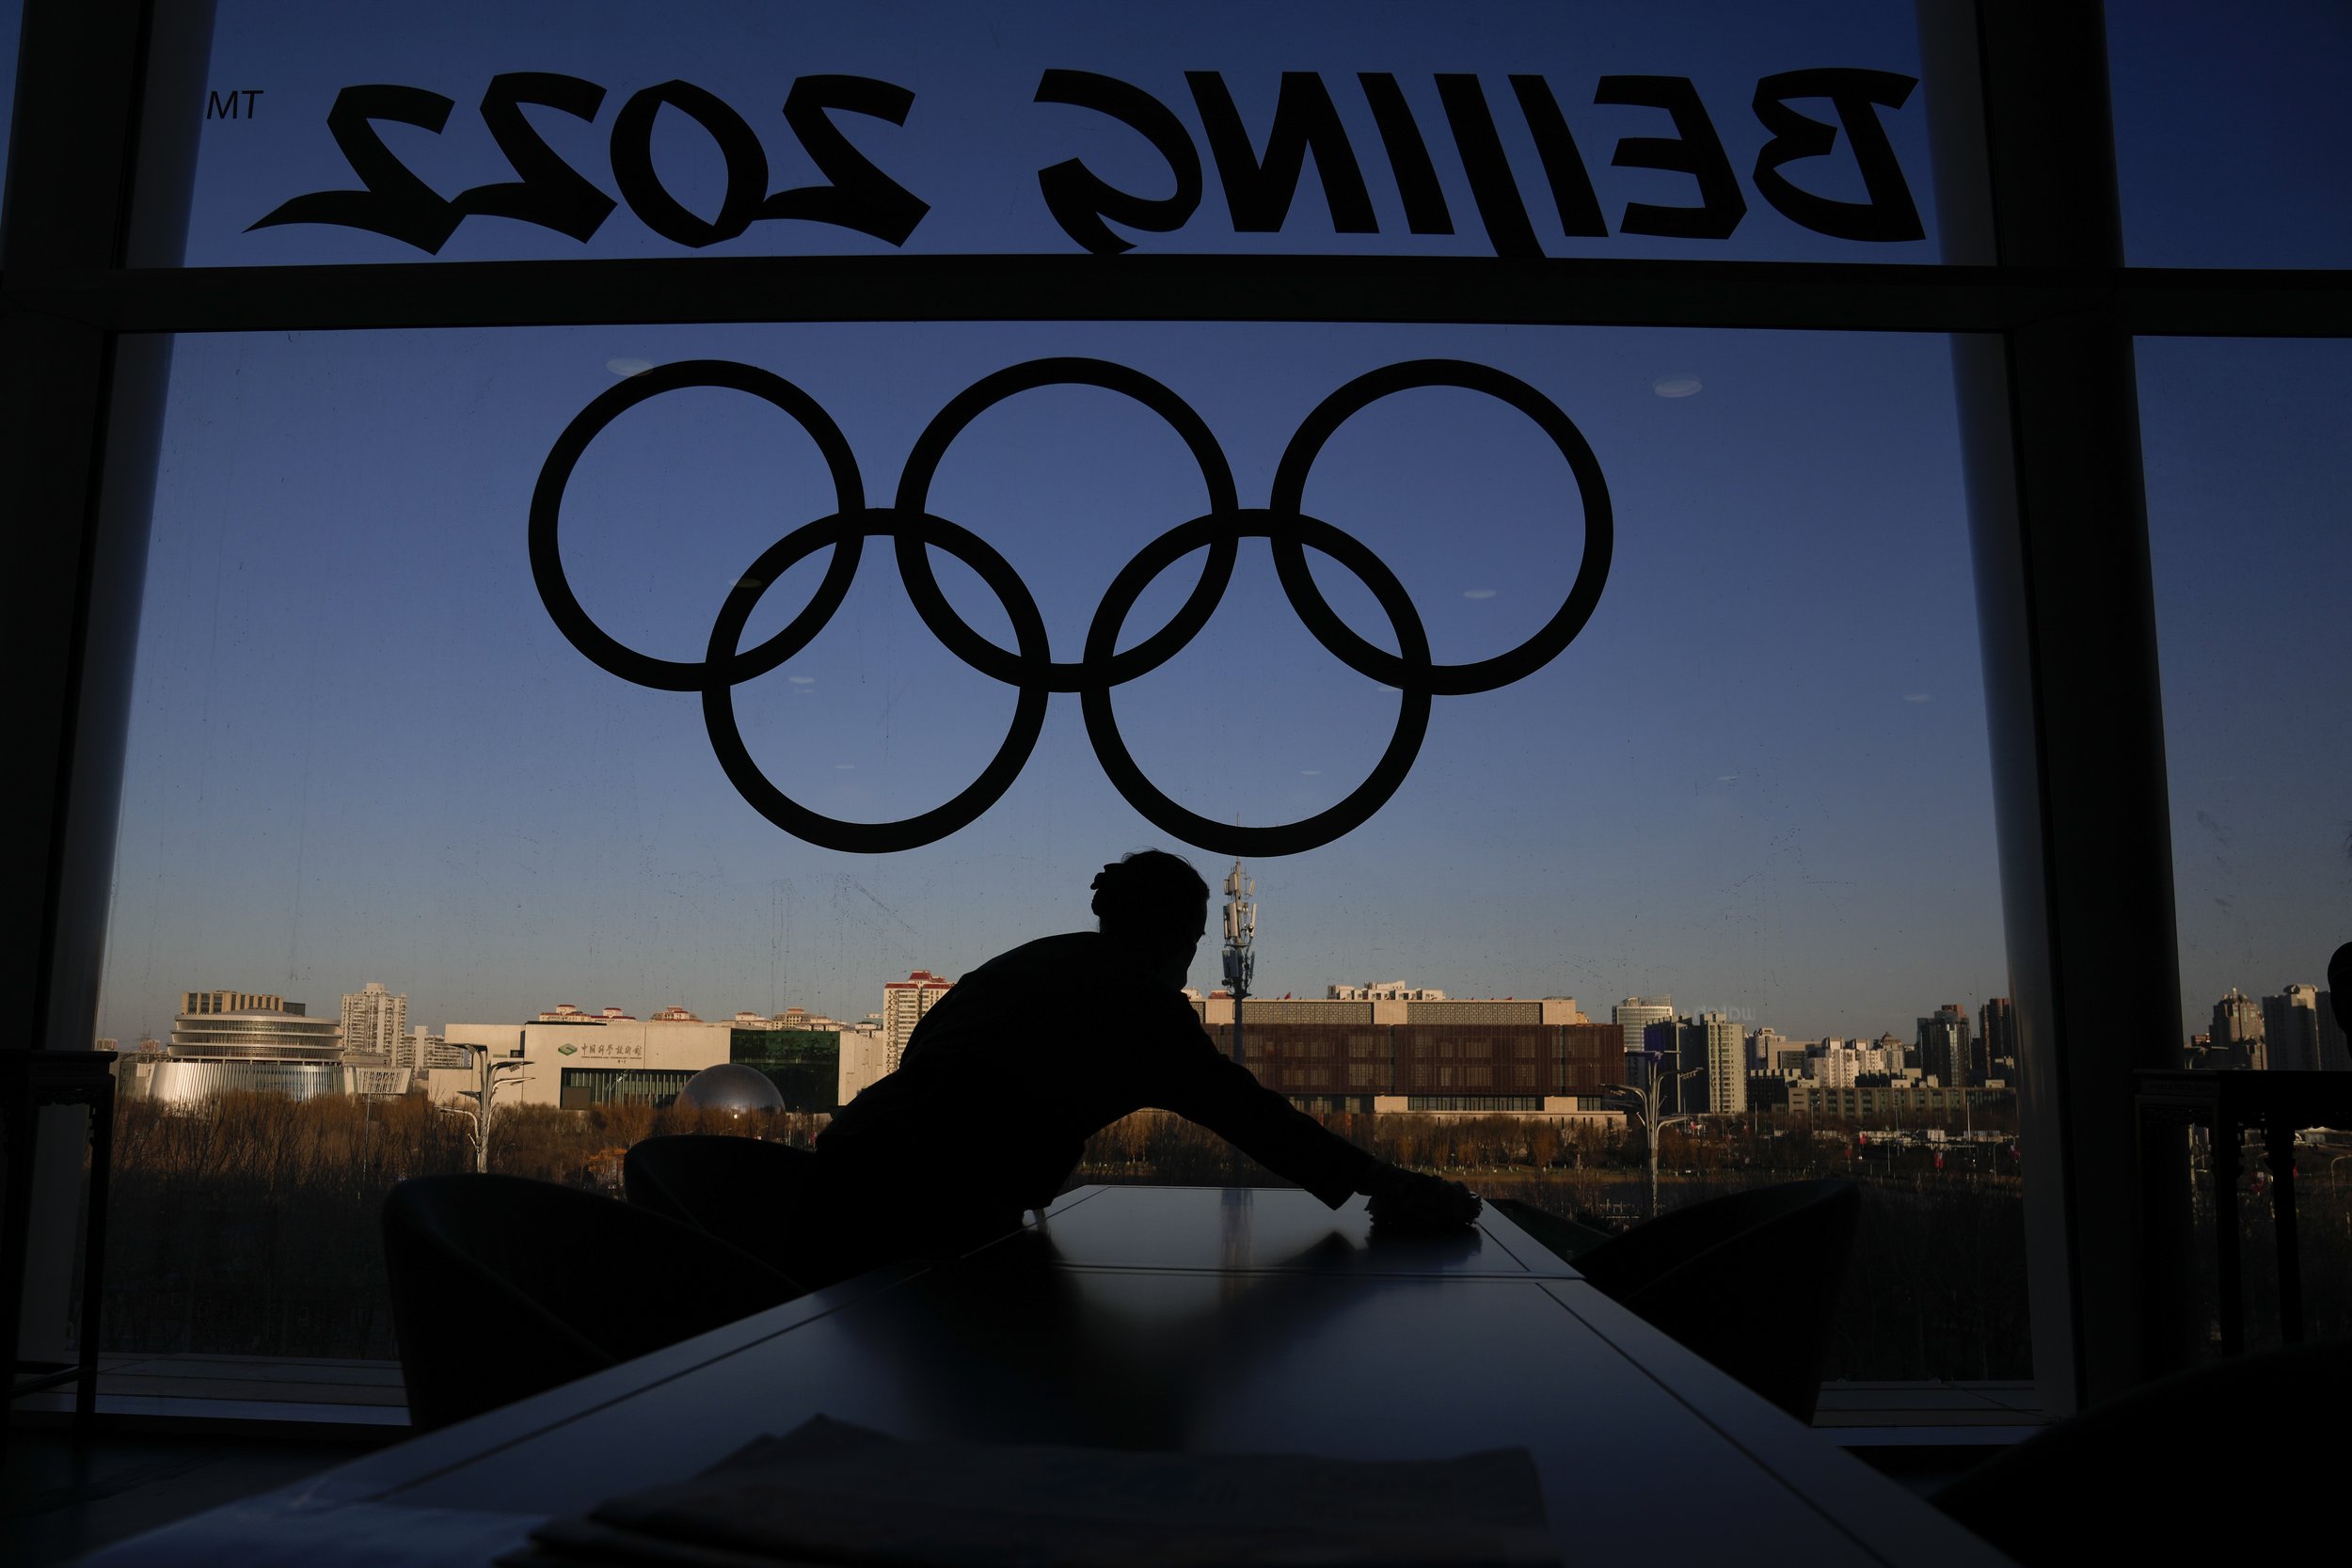  A woman cleans a table at the Olympics Main Media Center ahead of the 2022 Winter Olympics, Tuesday, Feb. 1, 2022, in Beijing. (AP Photo/Natacha Pisarenko) 